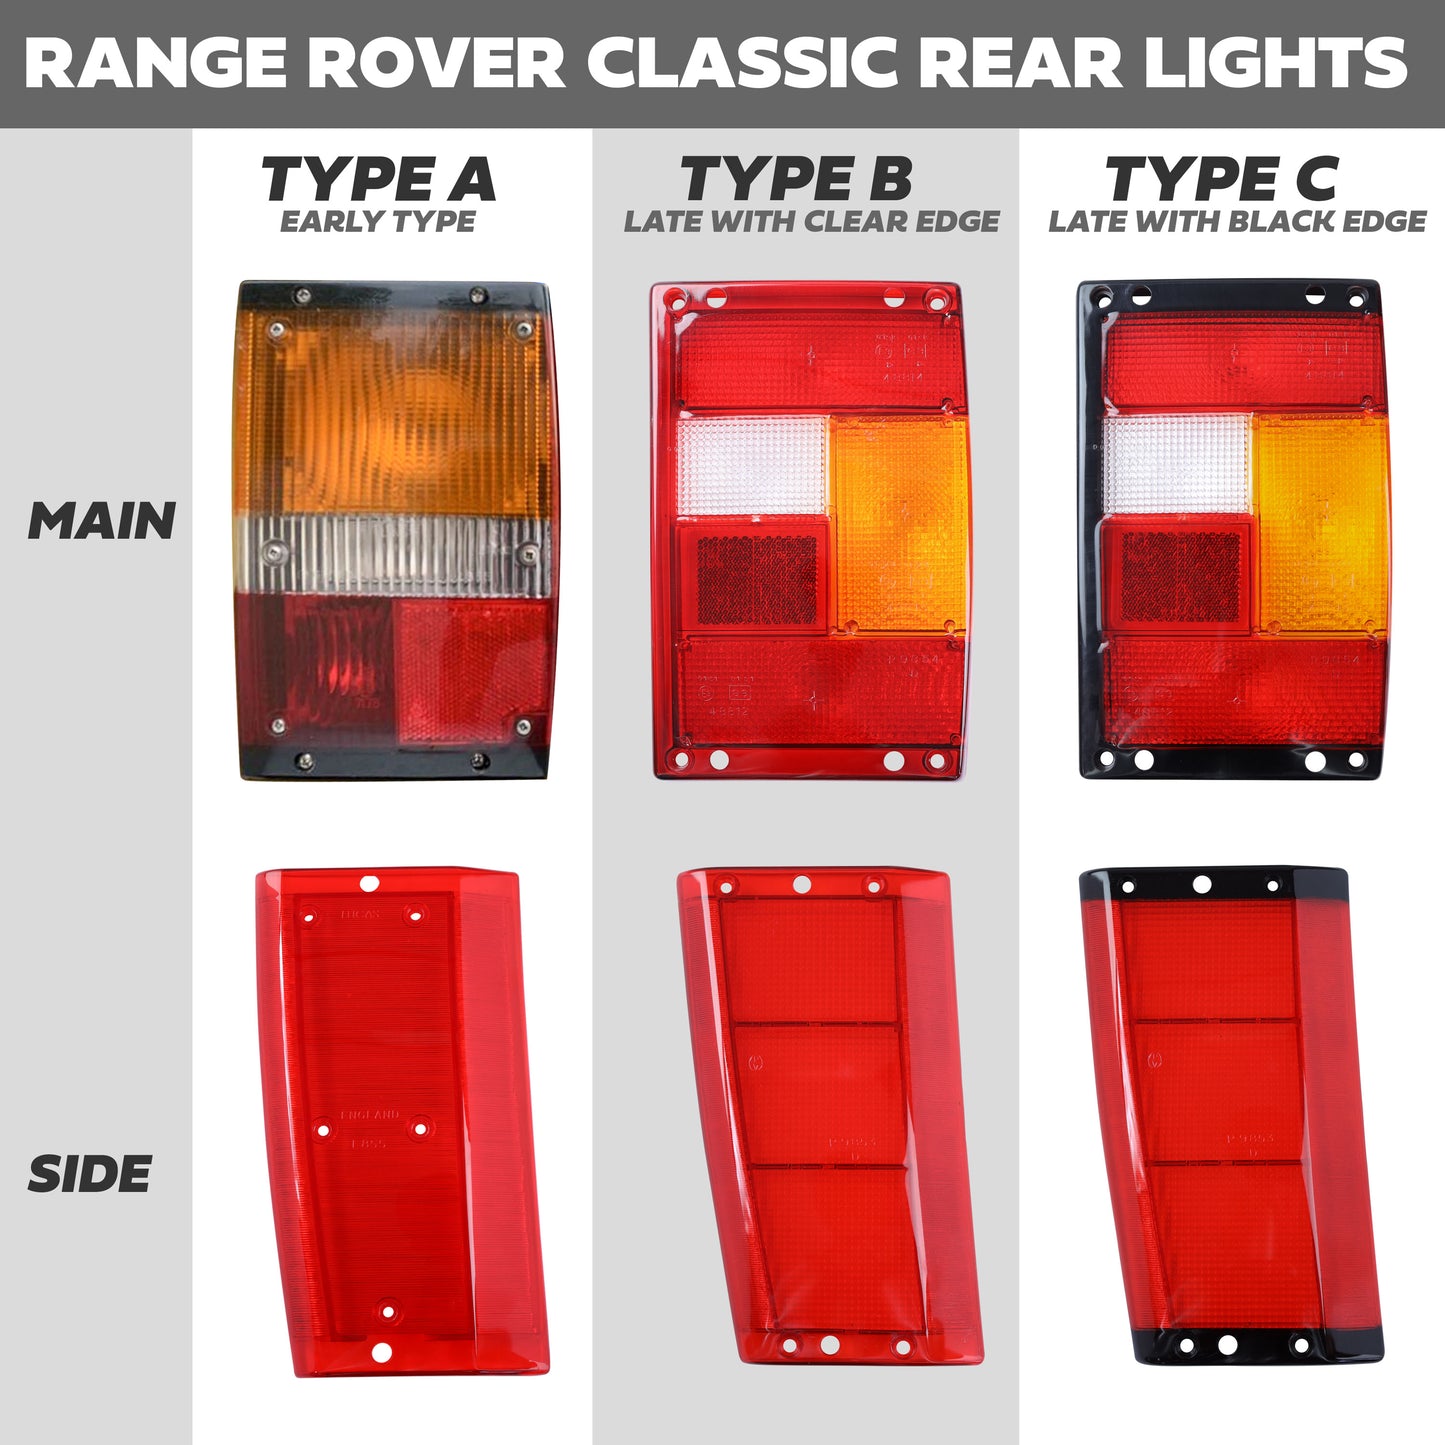 Rear Light Lens for Range Rover Classic - Side Section - Early Type - Right Side